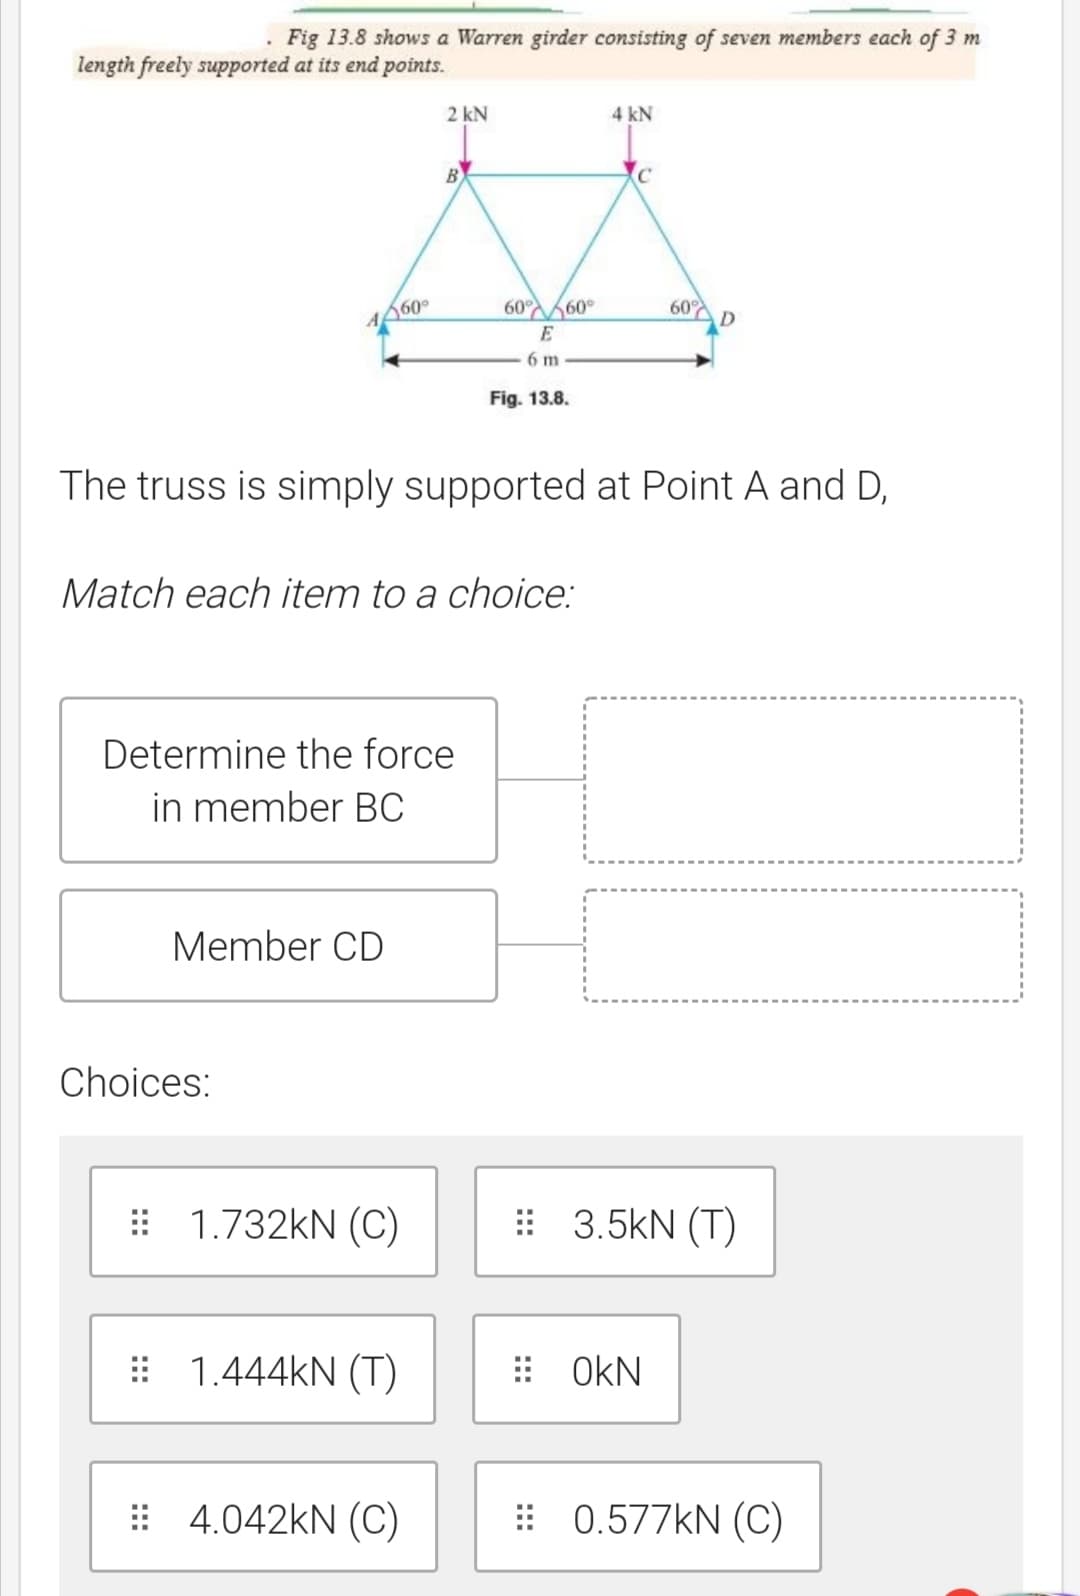 Fig 13.8 shows a Warren girder consisting of seven members each of 3 m
length freely supported at its end points.
2 kN
4 kN
B
A60°
60 60°
60 D
E
6 m
Fig. 13.8.
The truss is simply supported at Point A and D,
Match each item to a choice:
Determine the force
in member BC
Member CD
Choices:
: 1.732KN (OC)
: 3.5kN (T)
: 1.444KN (T)
: OKN
: 4.042kN (C)
: 0.577KN (C)
